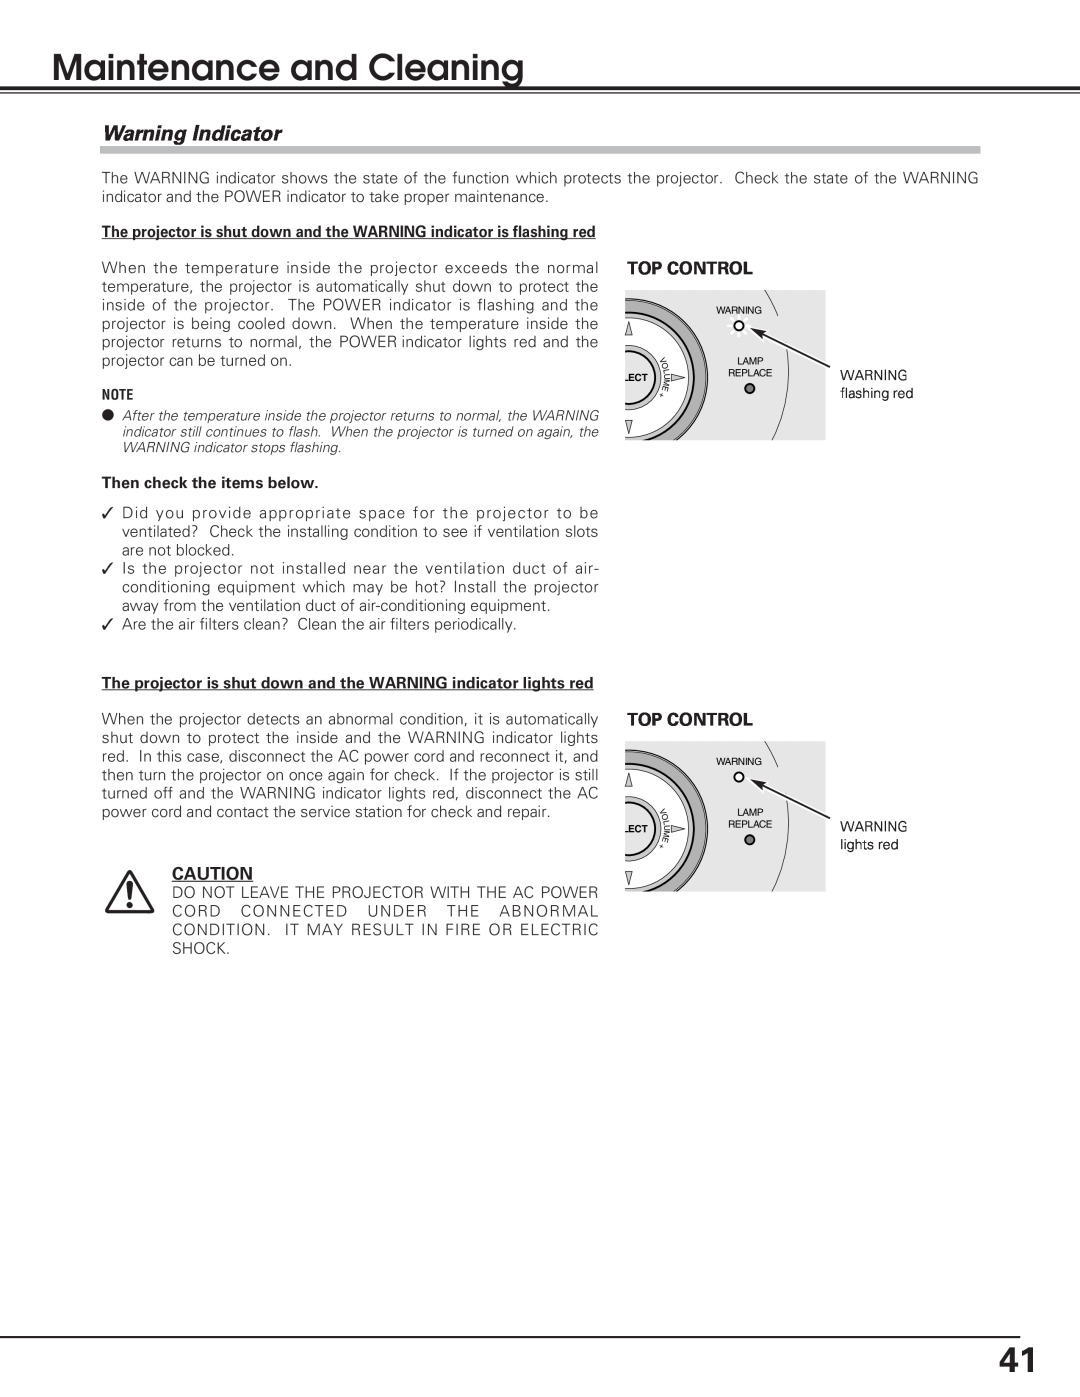 Sanyo PLC-SL20 owner manual Maintenance and Cleaning, Warning Indicator, Then check the items below 